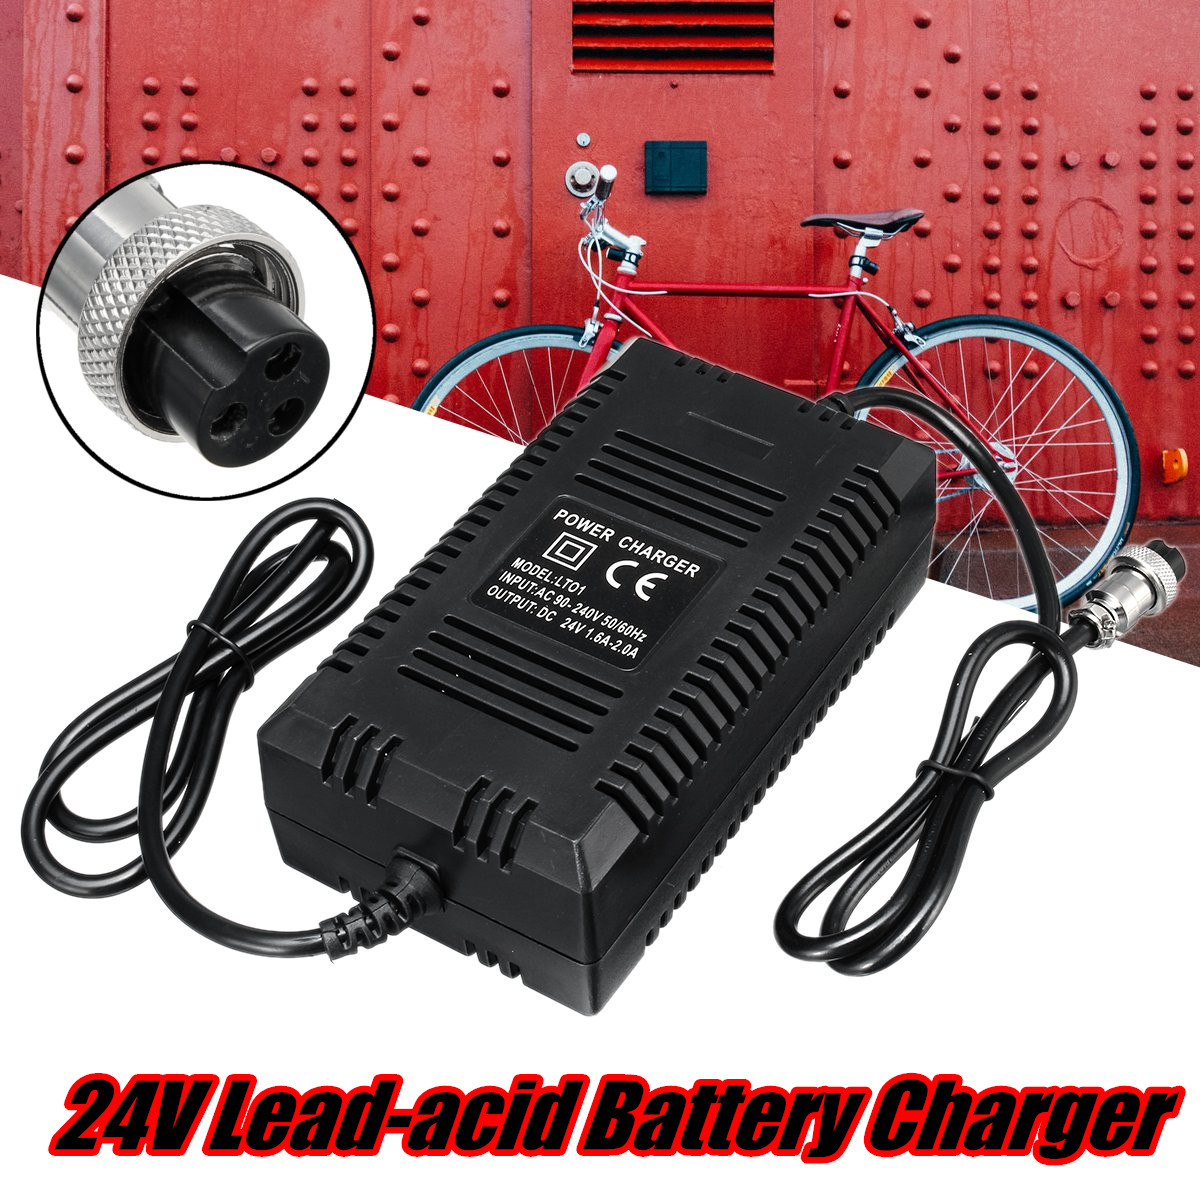 24V-20A-Lead-acid-Battery-Charger-Scooter-Charger-1374209-1